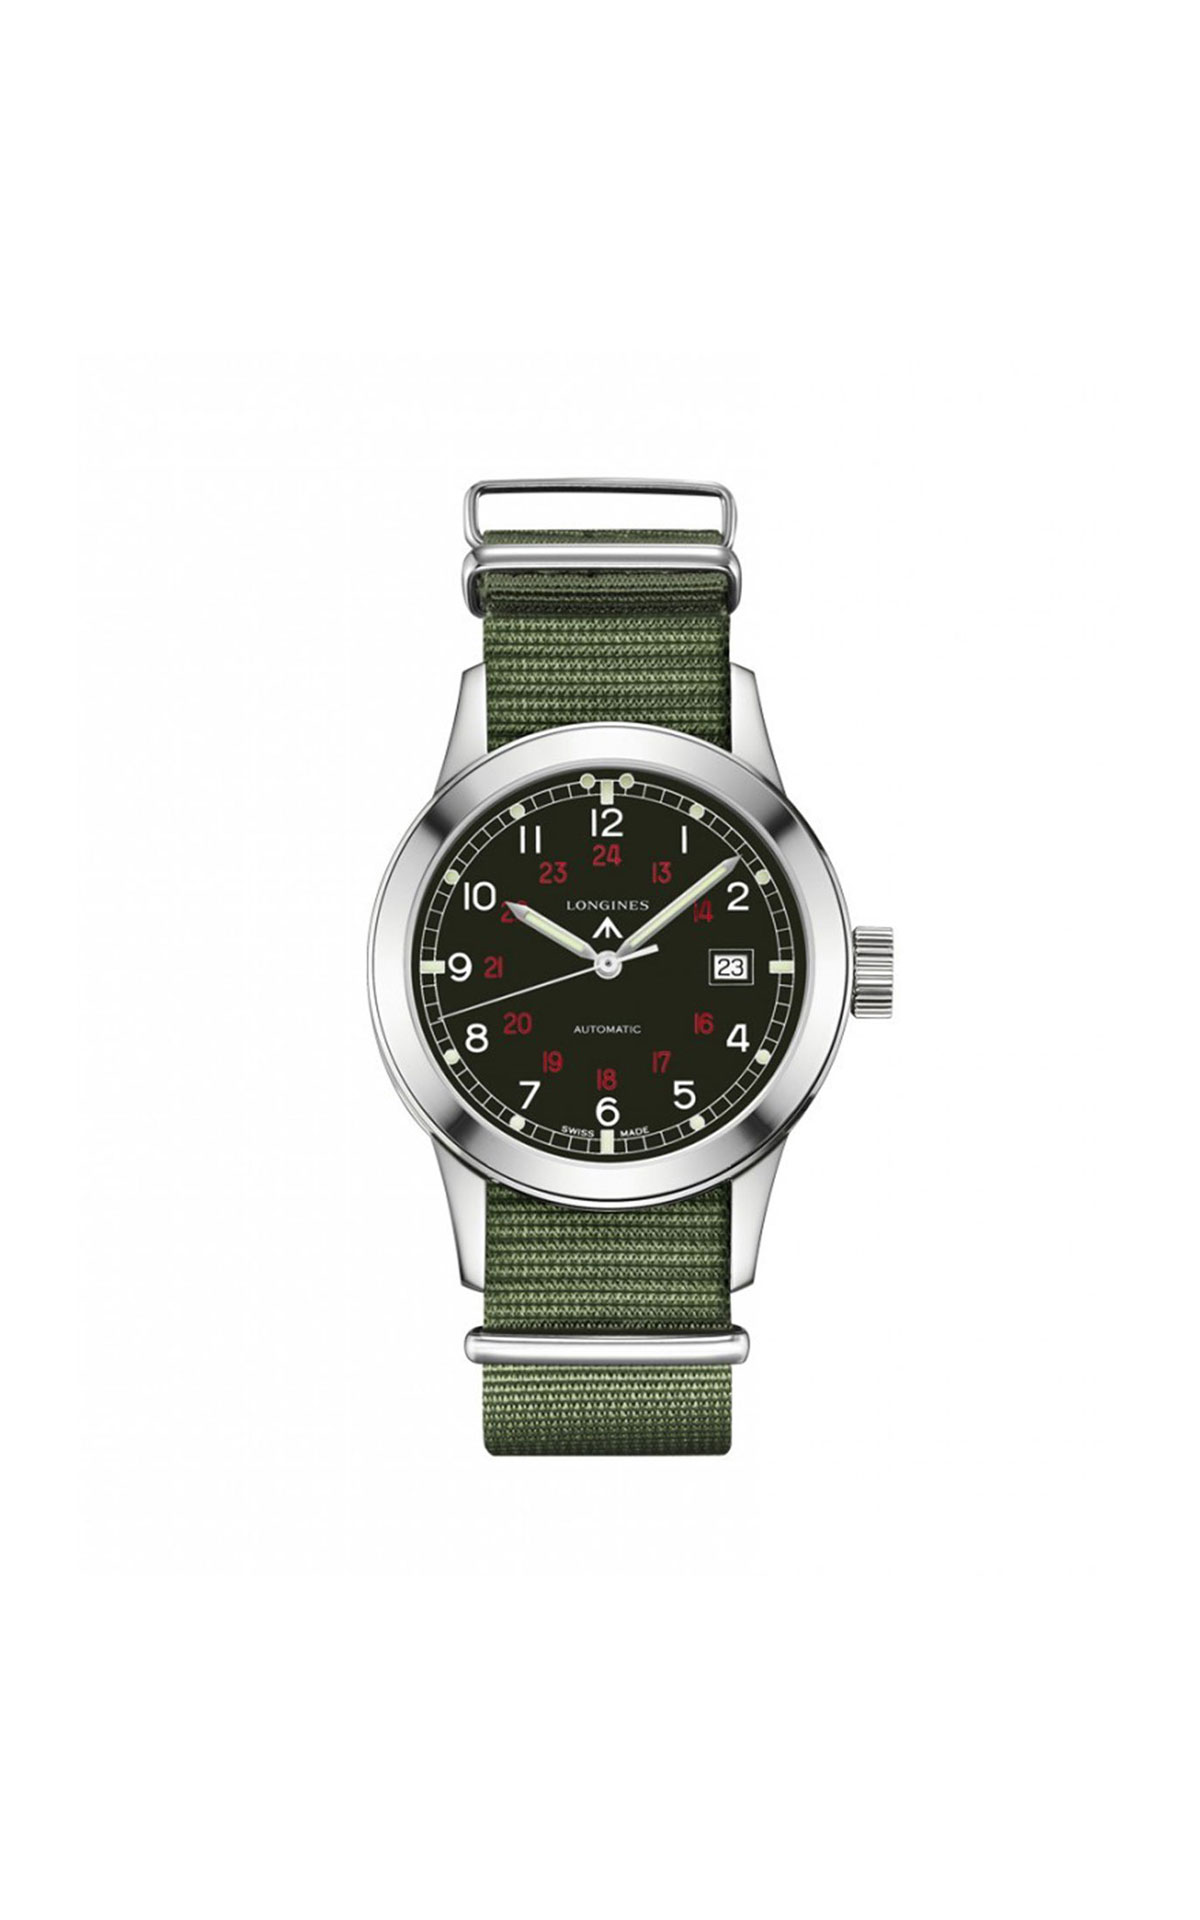 Hour Passion Longines green fabric strap watch from Bicester Village